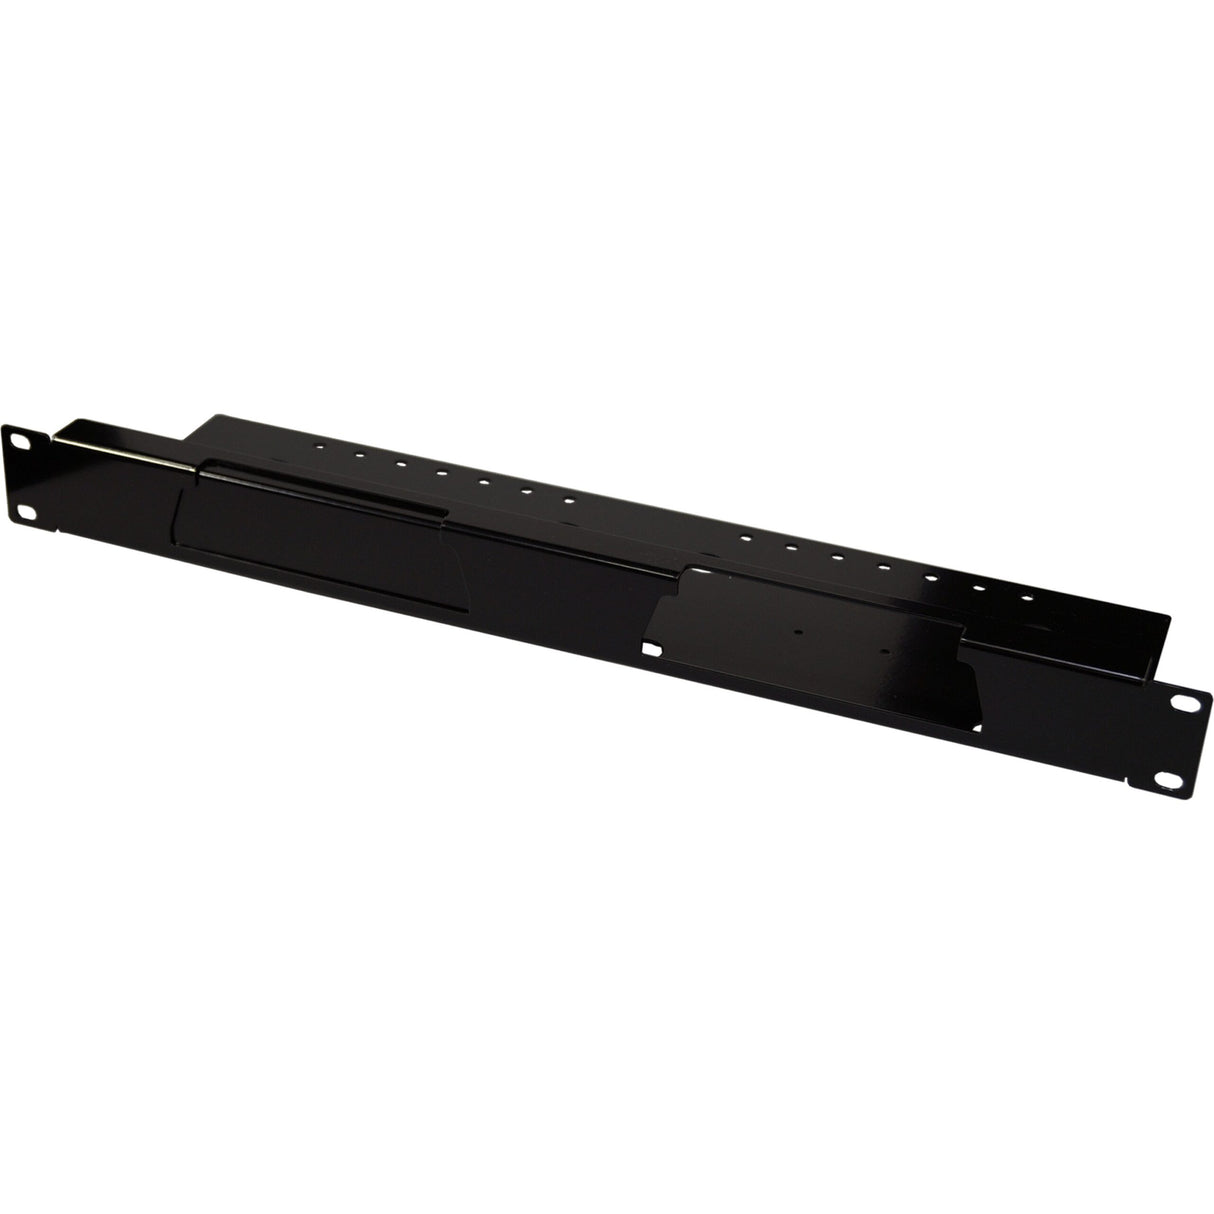 Visual Productions Single Space 19-Inch Rackmount Bracket for 2 Cores Unit